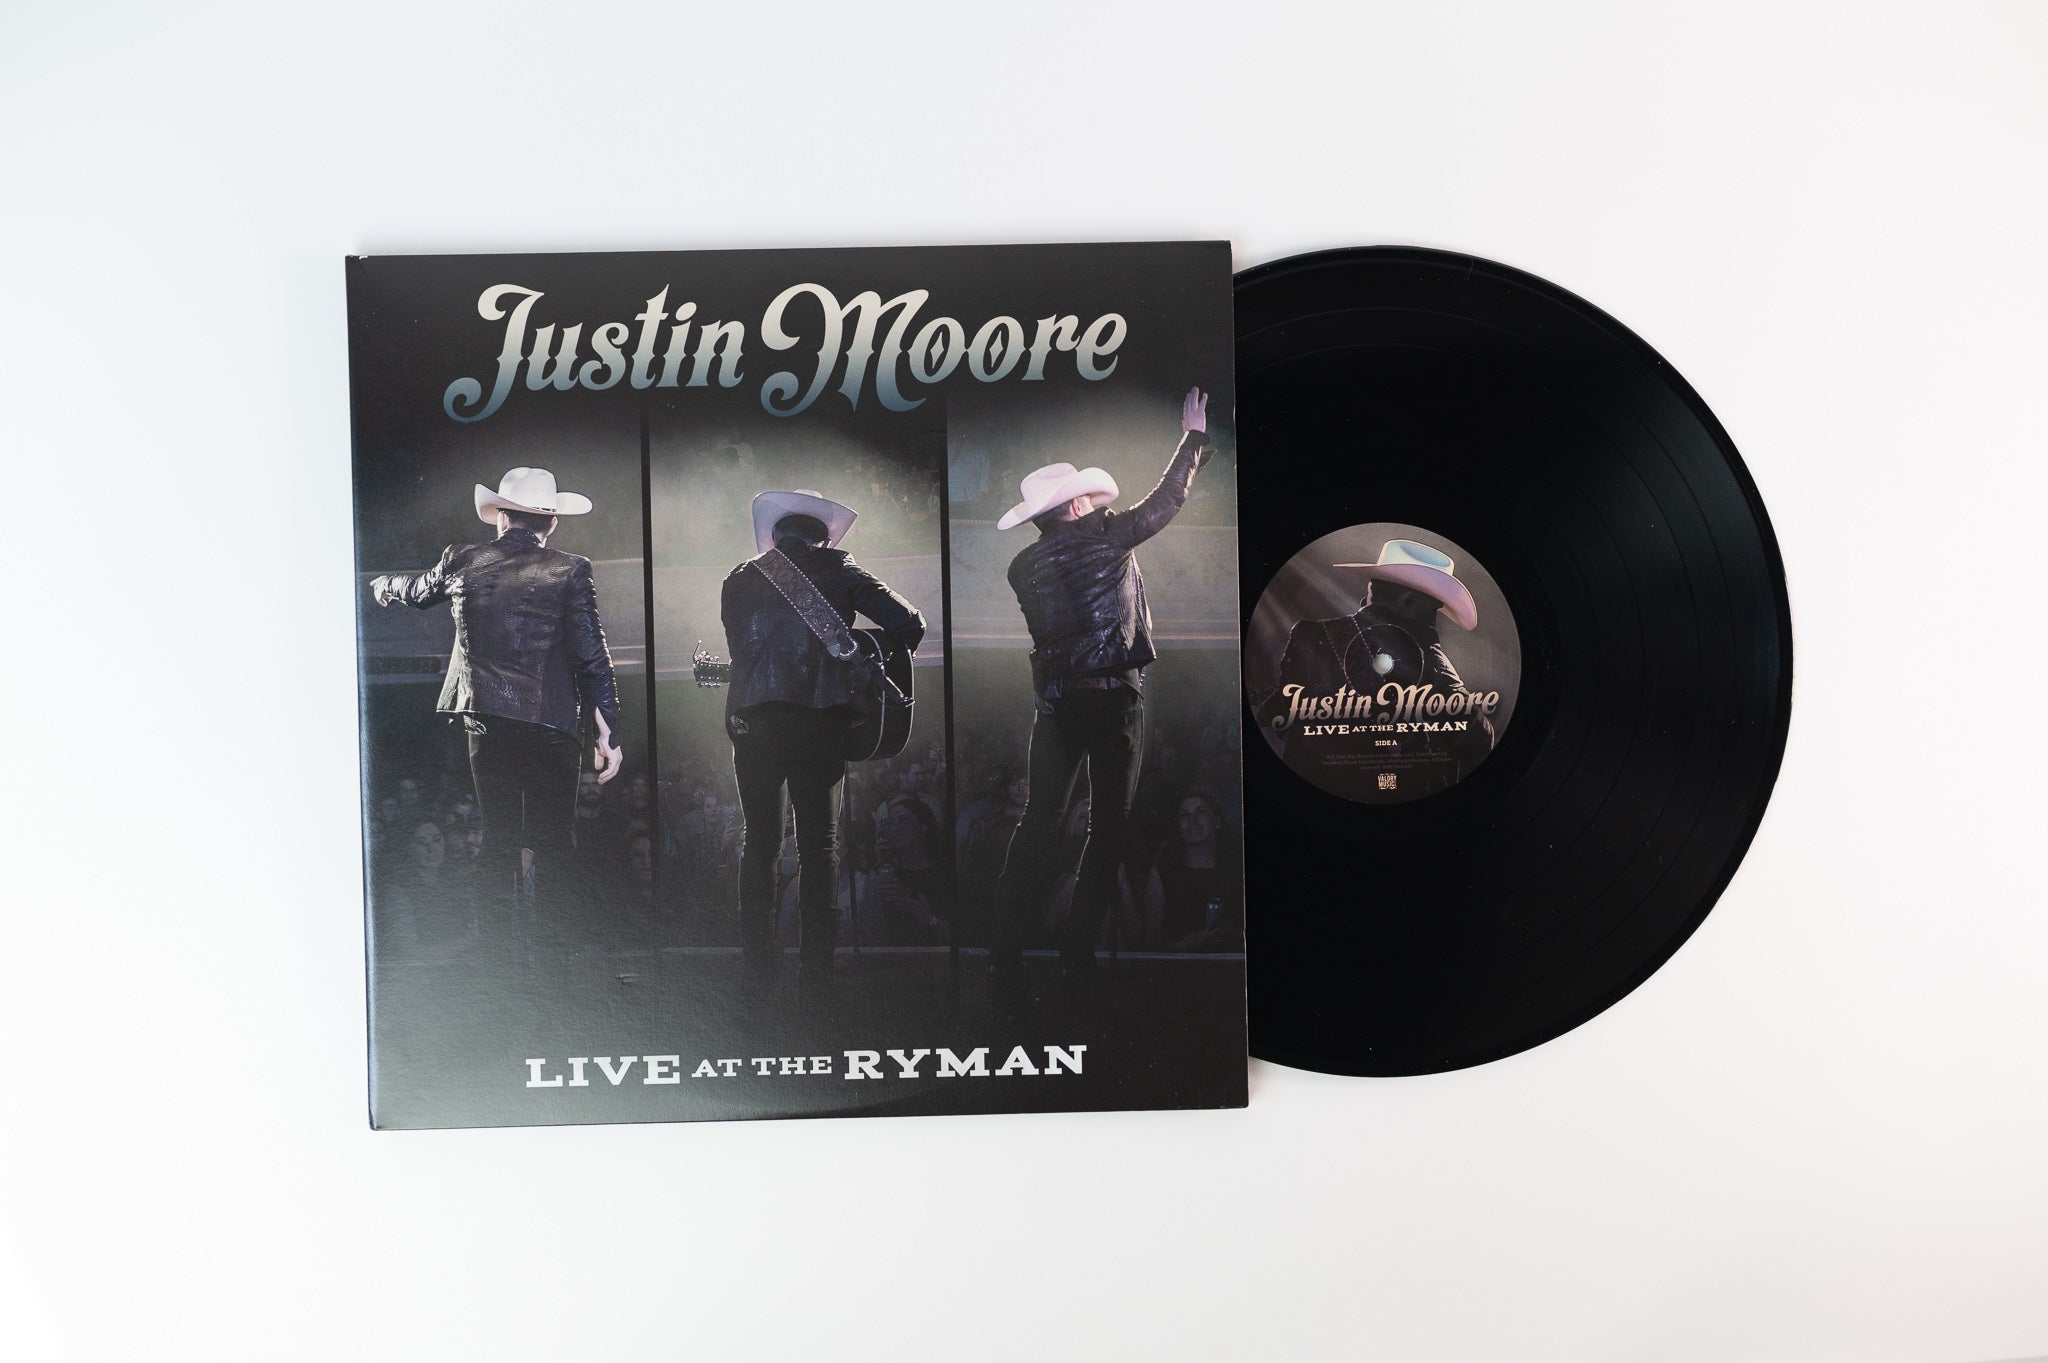 Justin Moore - Live At The Ryman on Valory Music